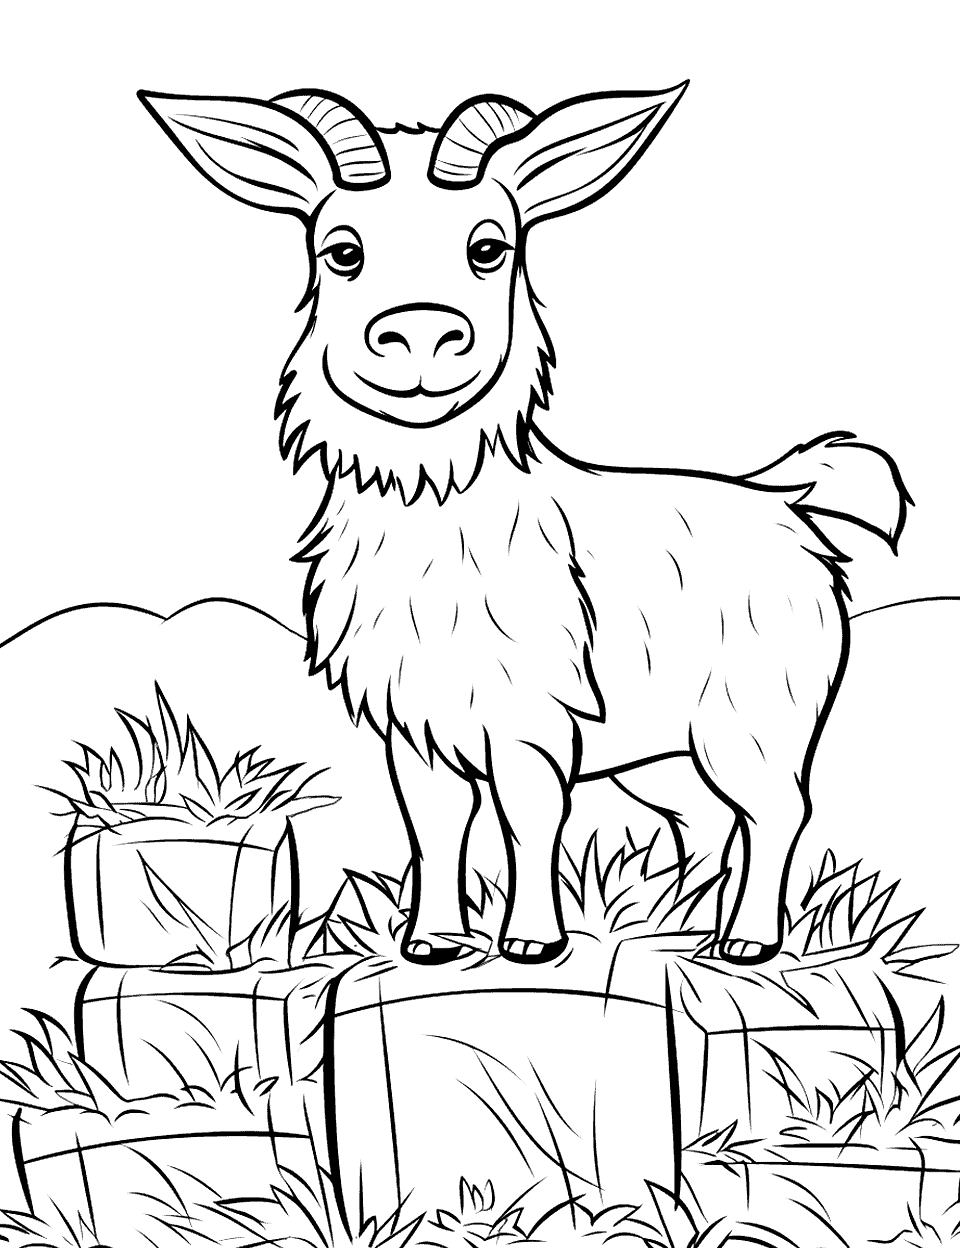 Goat on Hay Bales Farm Coloring Page - A goat on top of a stack of hay bales.